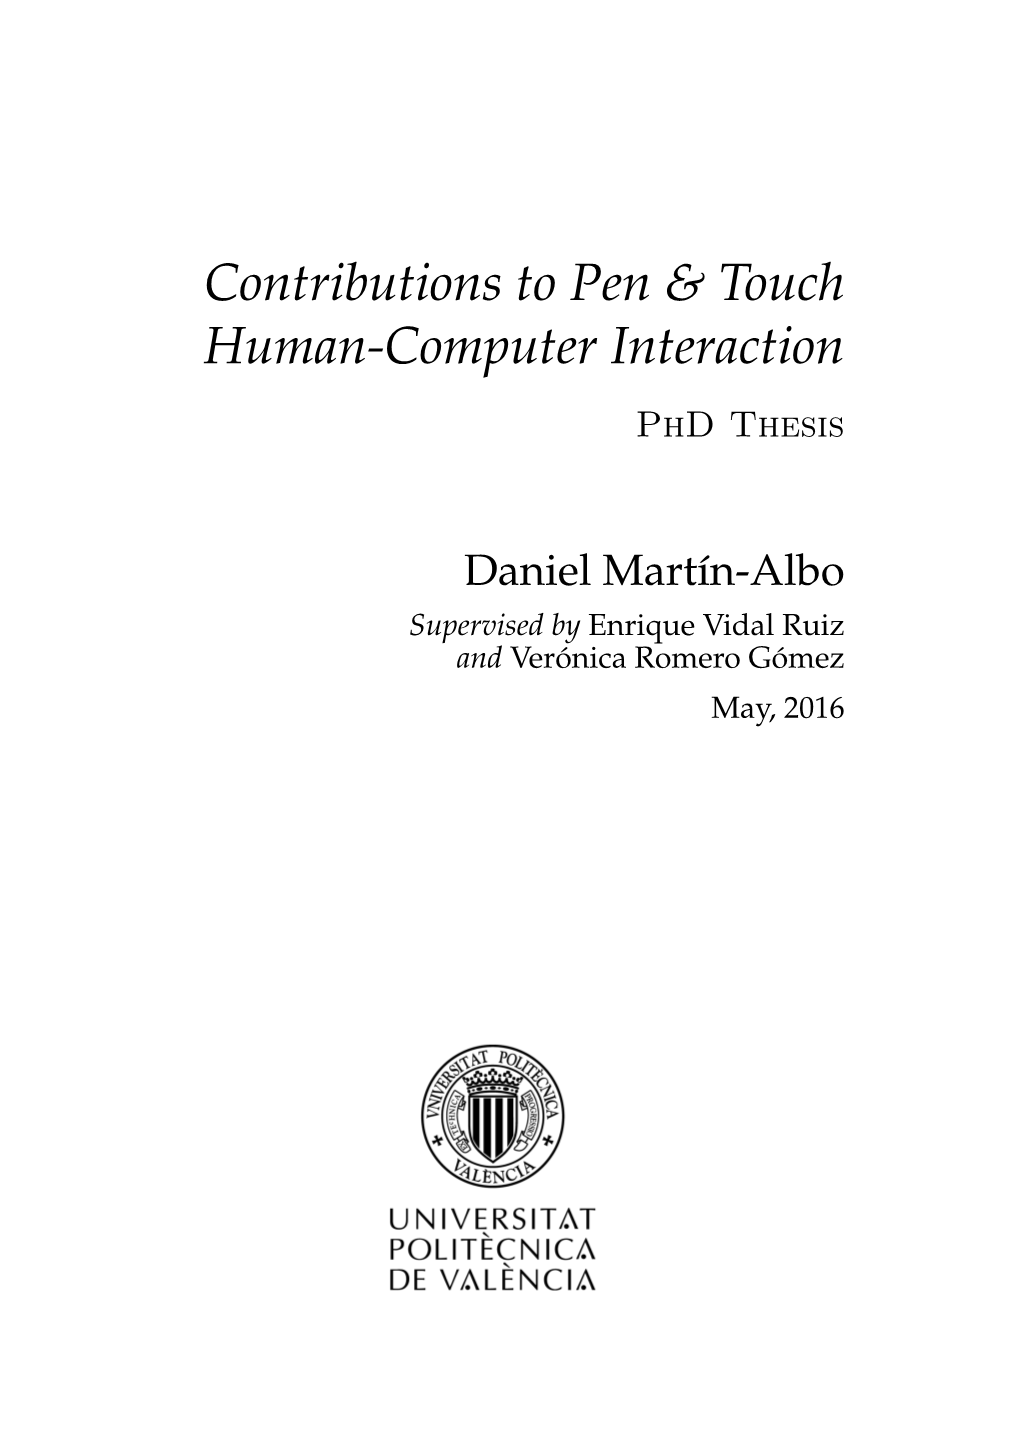 Contributions to Pen & Touch Human-Computer Interaction